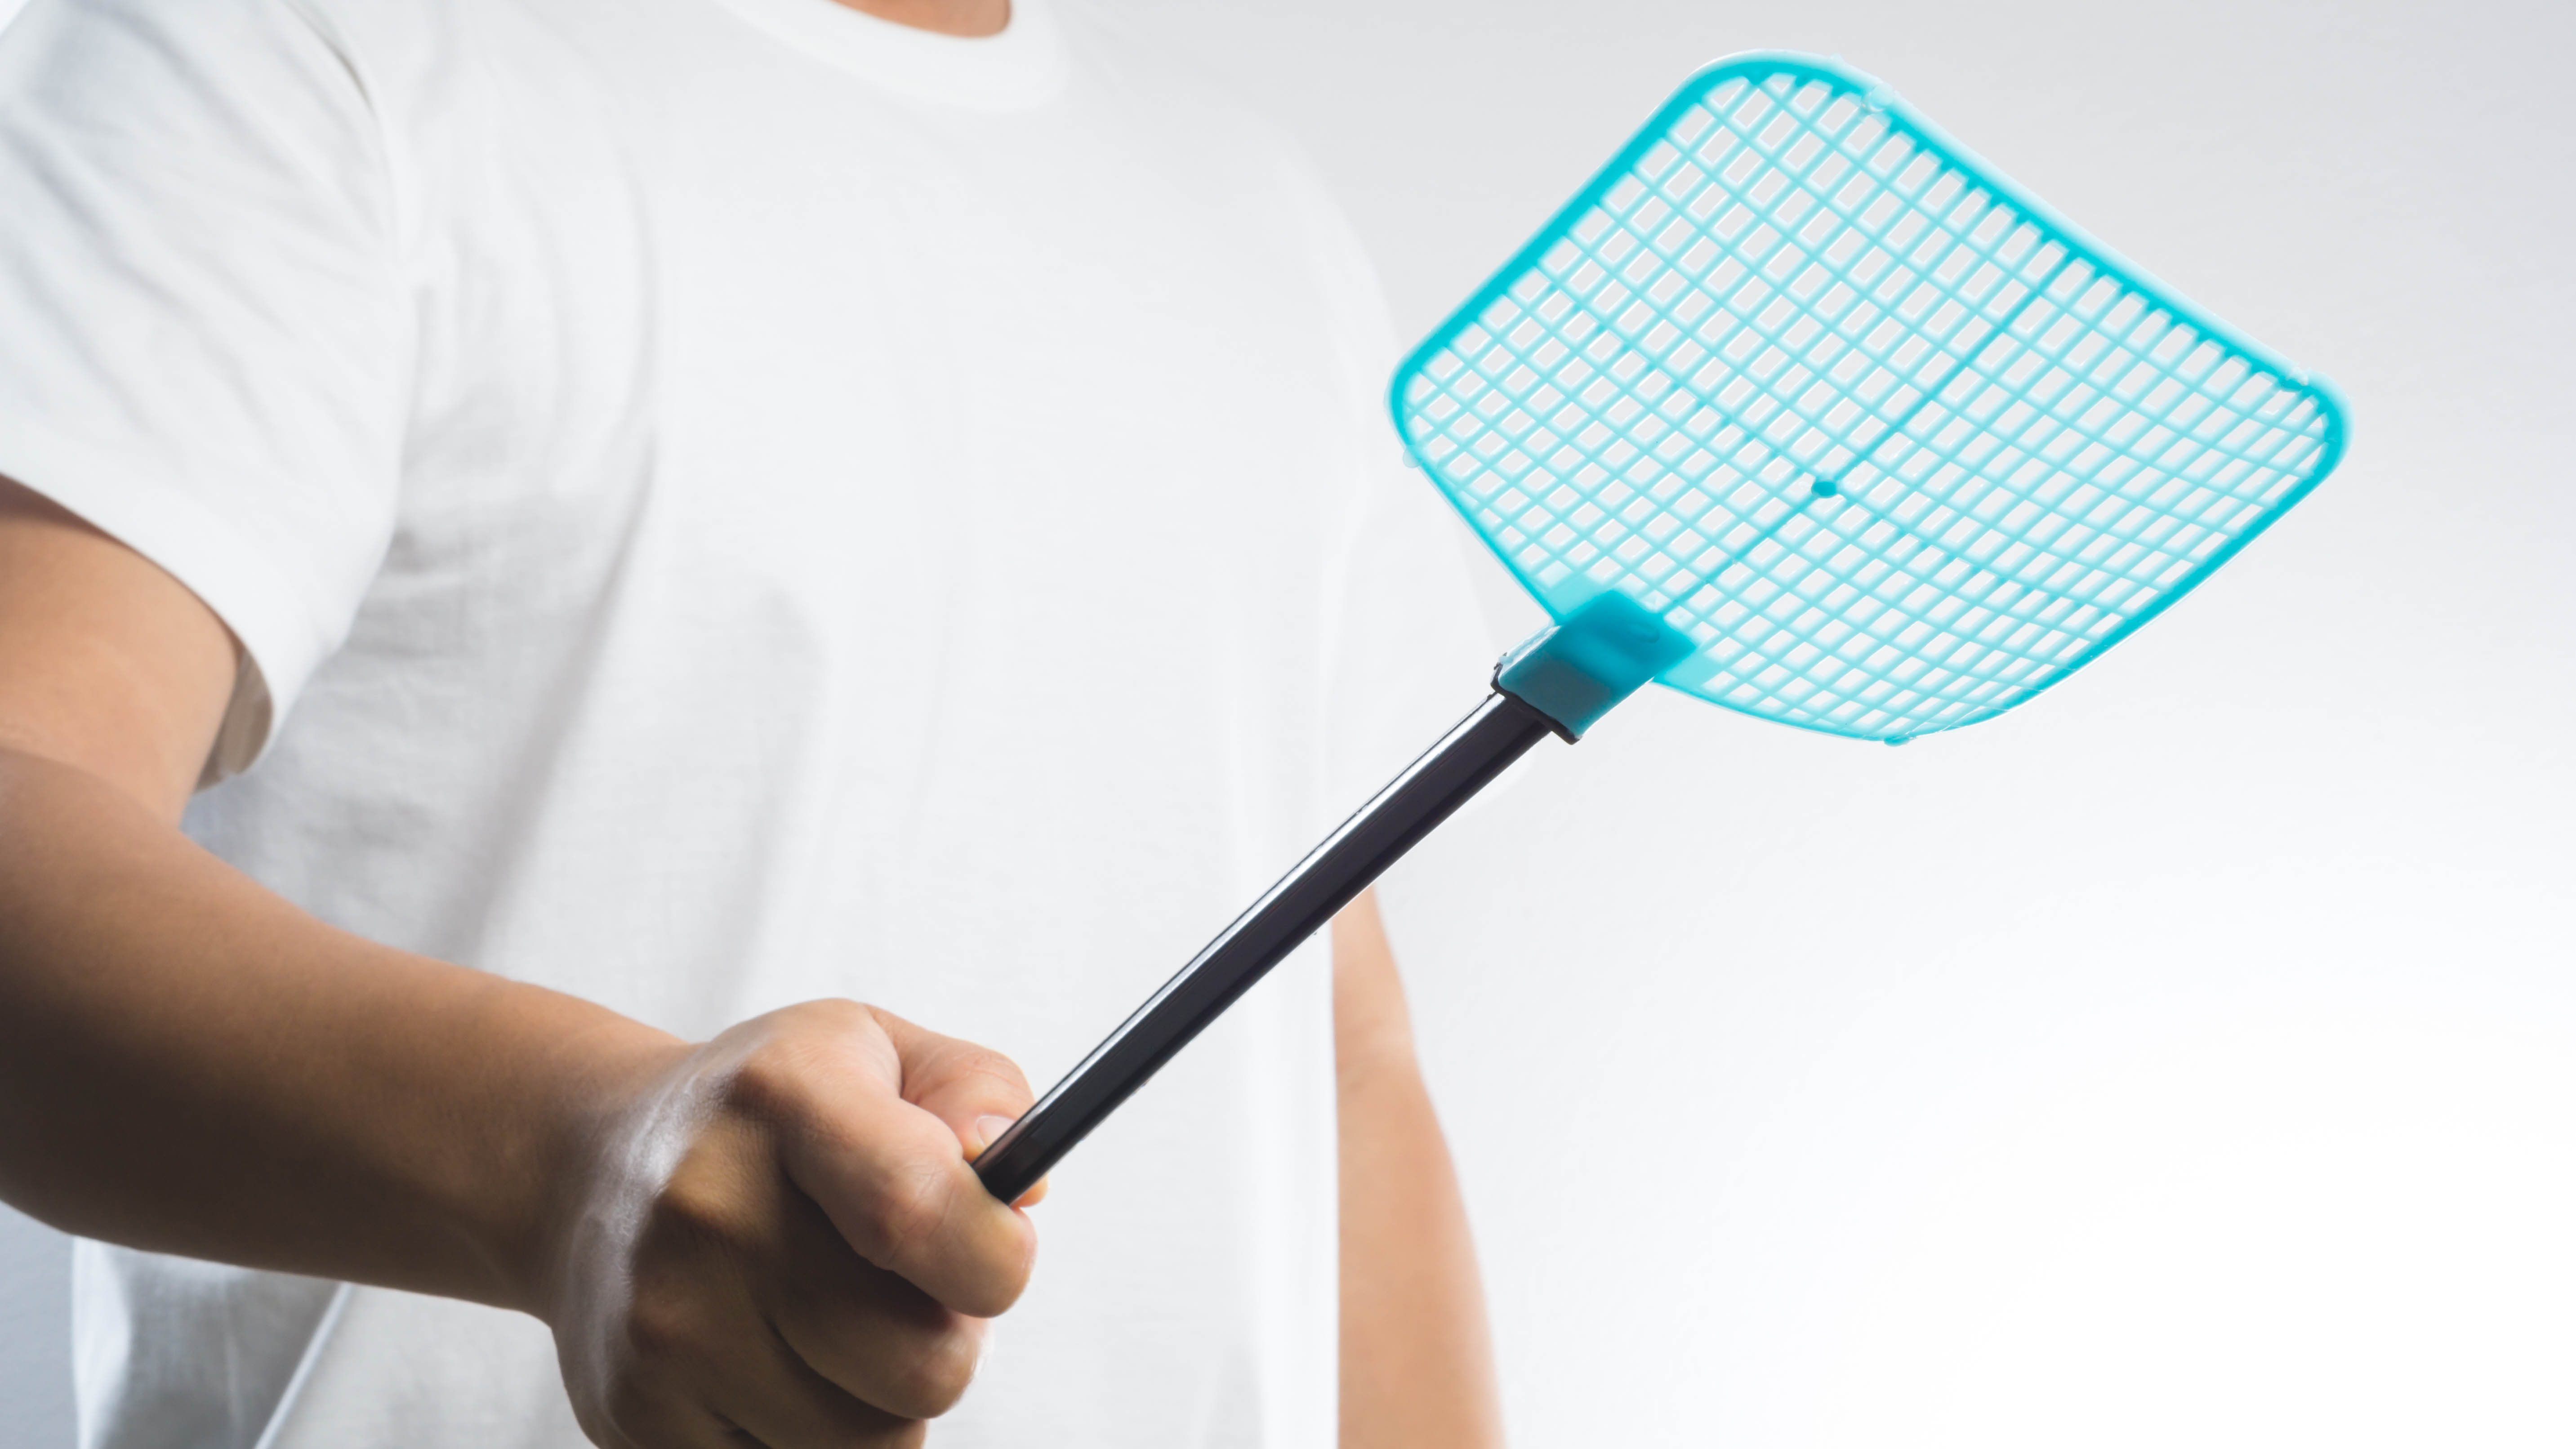 A fly swatter being held in a hand